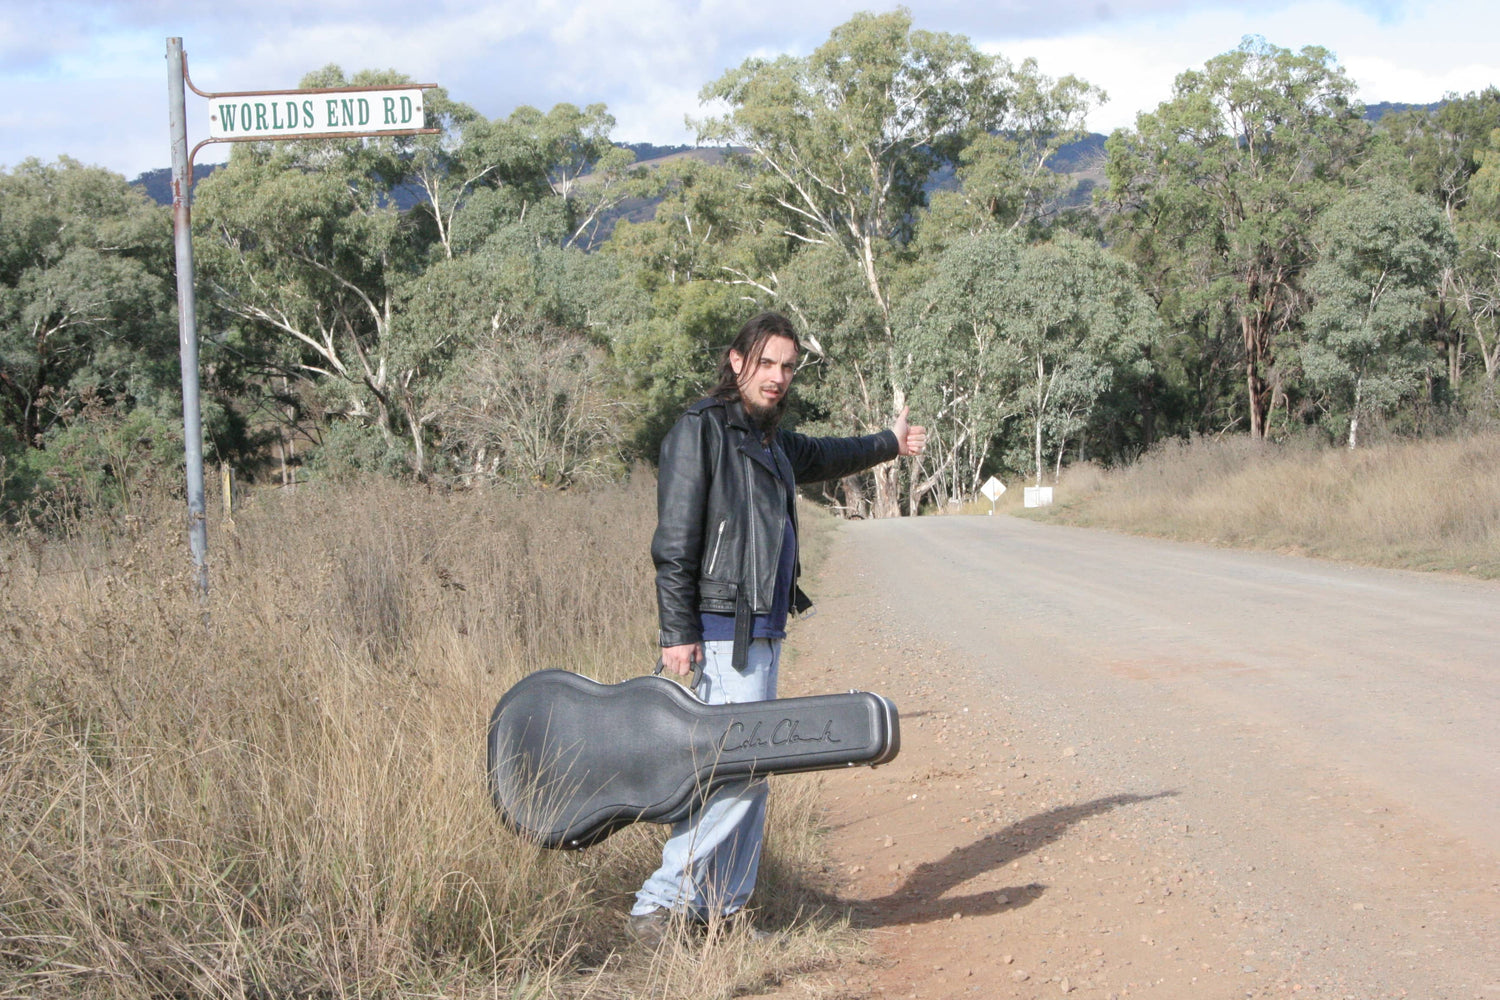 Kieran Wicks Musician Hunter & King Album Cover Kieran Wicks Hitch Hiking with cole clark guitar. Country Dirt Road street sign Worlds End Road Leather Jacket